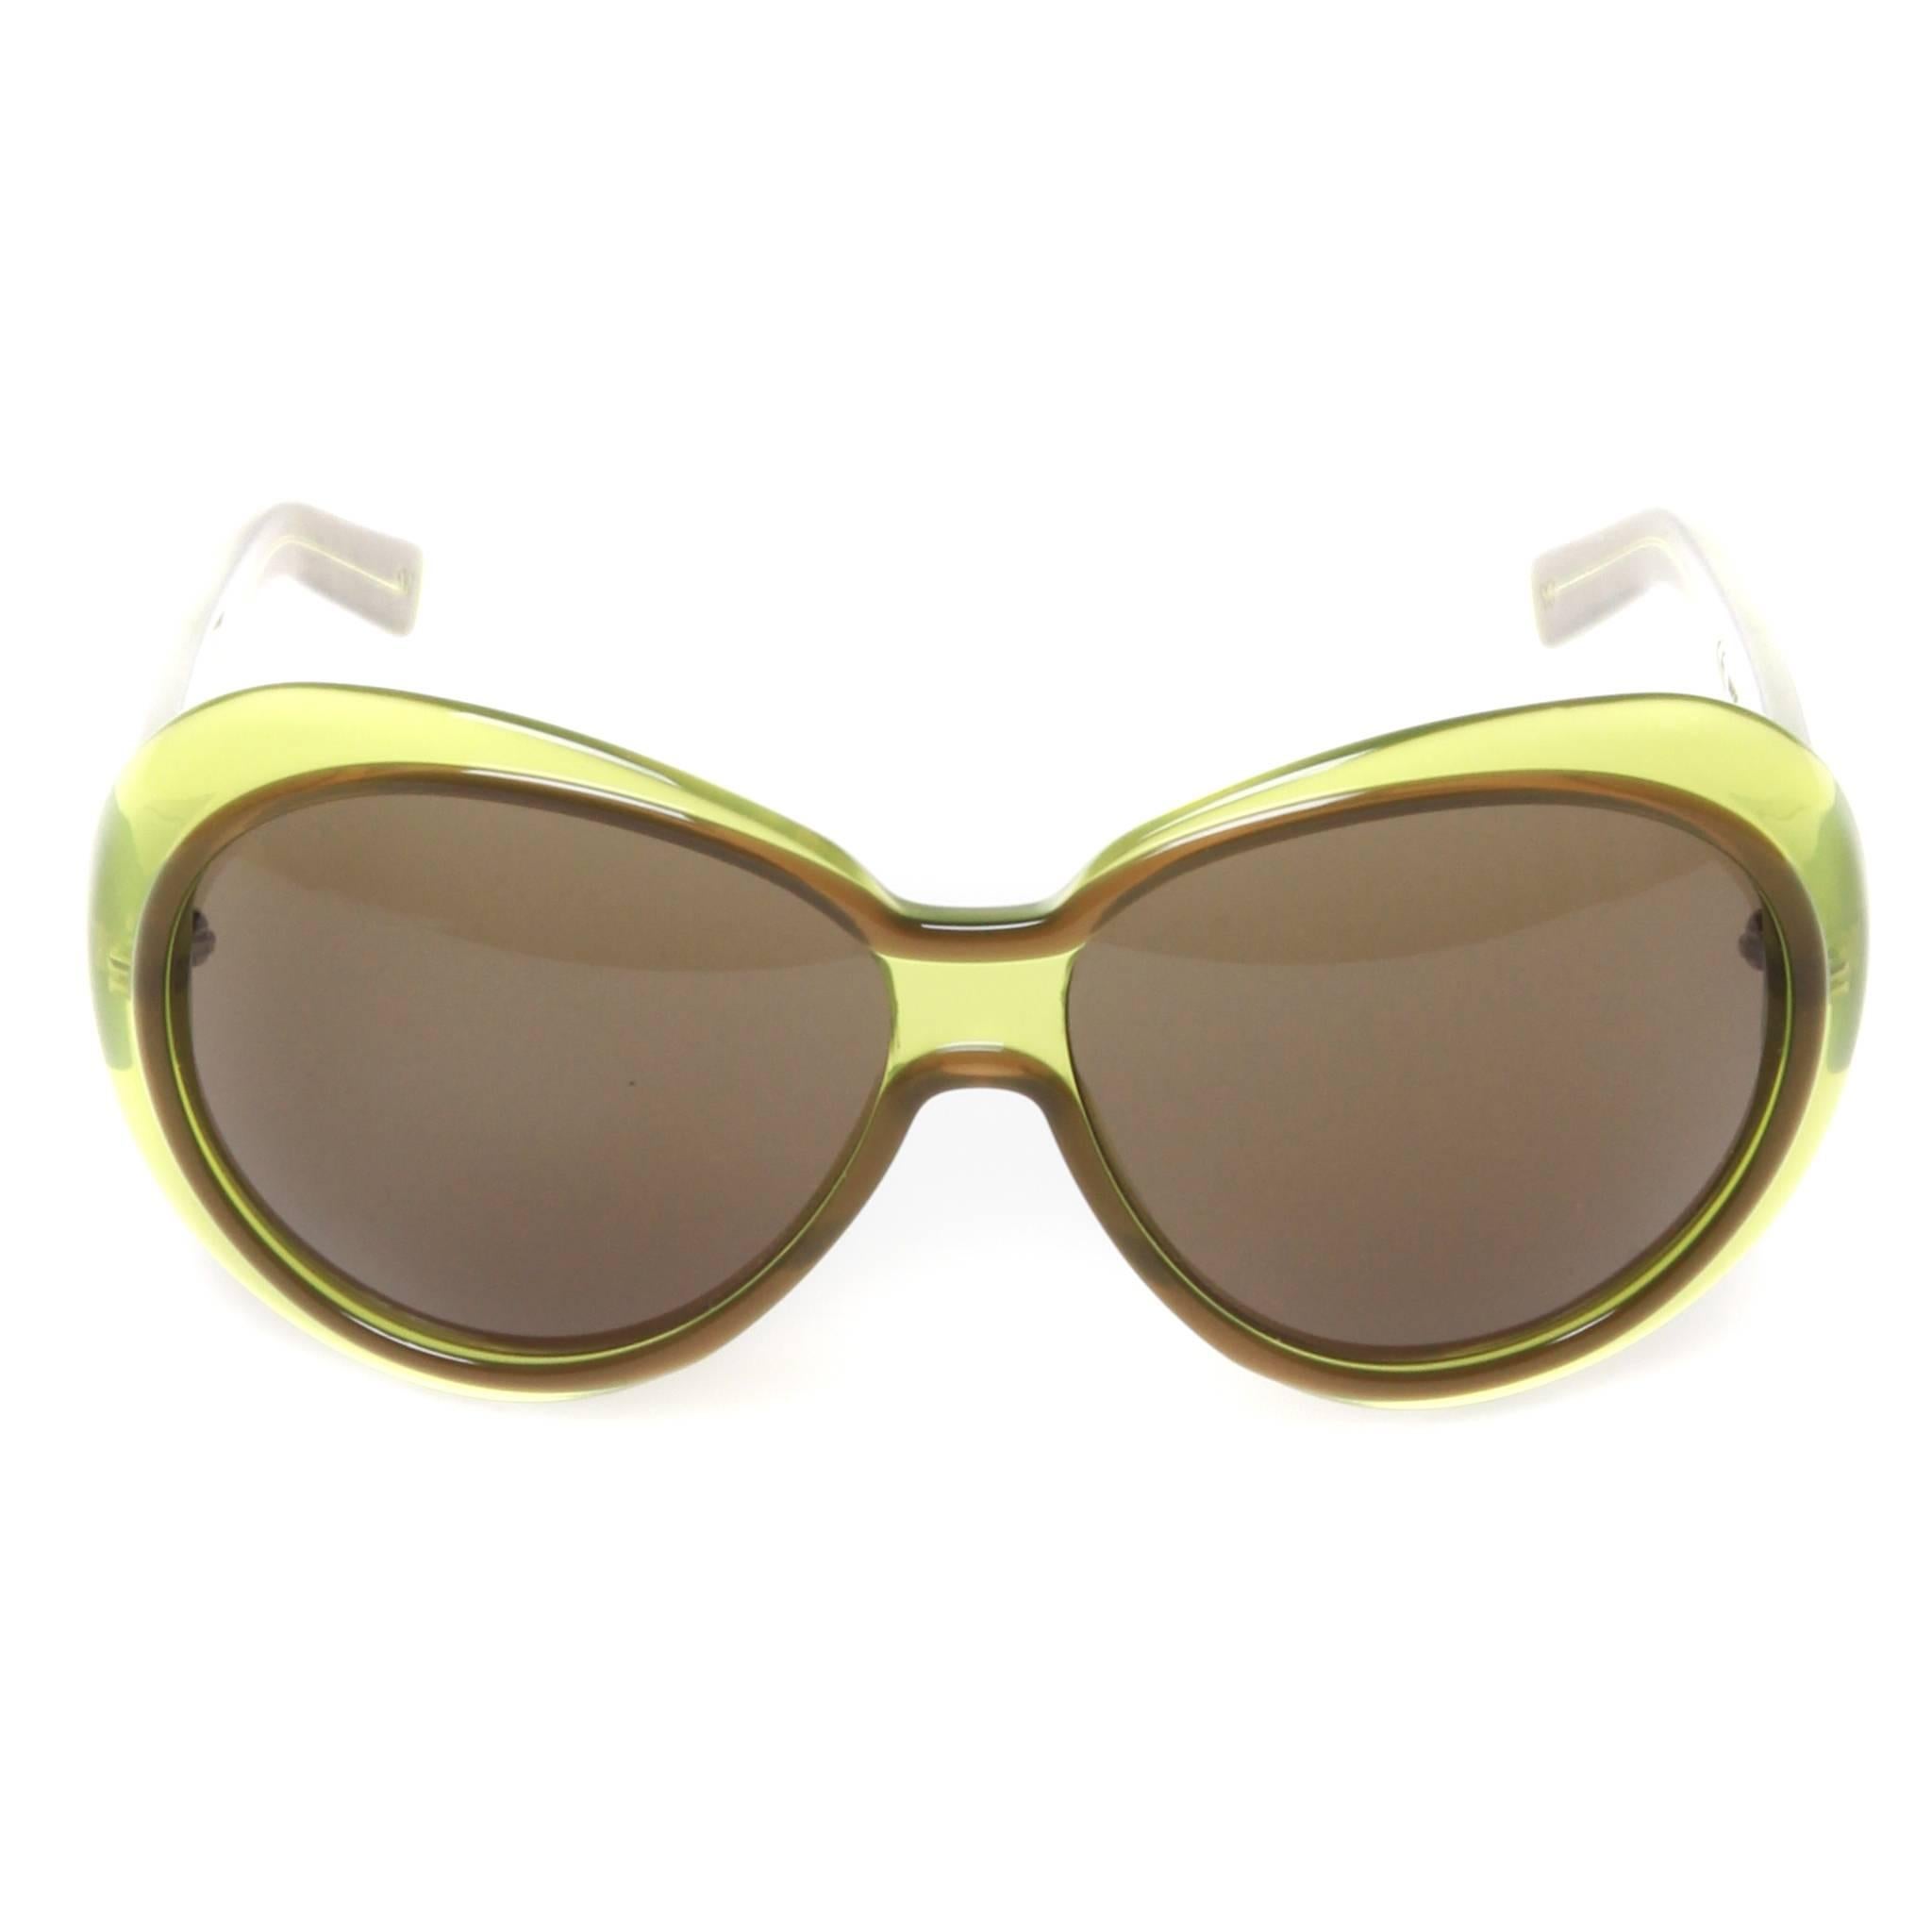 Lime green and brown resin Bottega Veneta oval sunglasses with brown tinted lenses and geometric accents at arms.